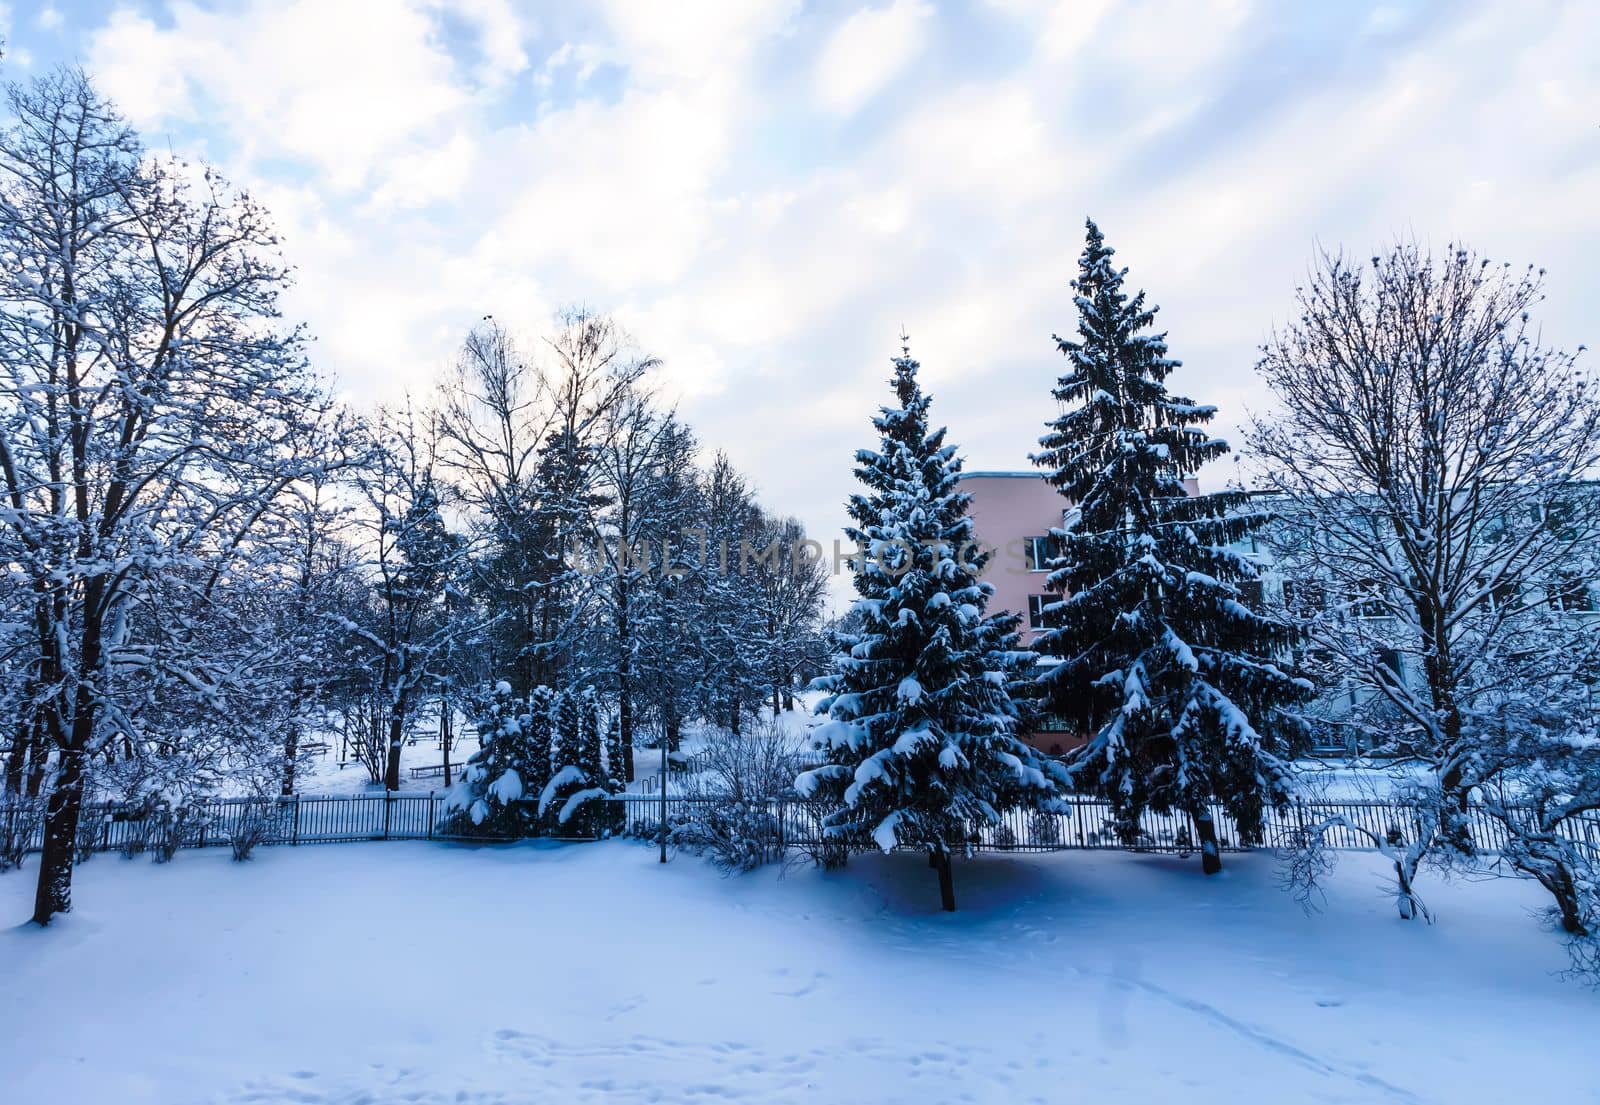 Winter landscape with snow-covered trees. by nightlyviolet